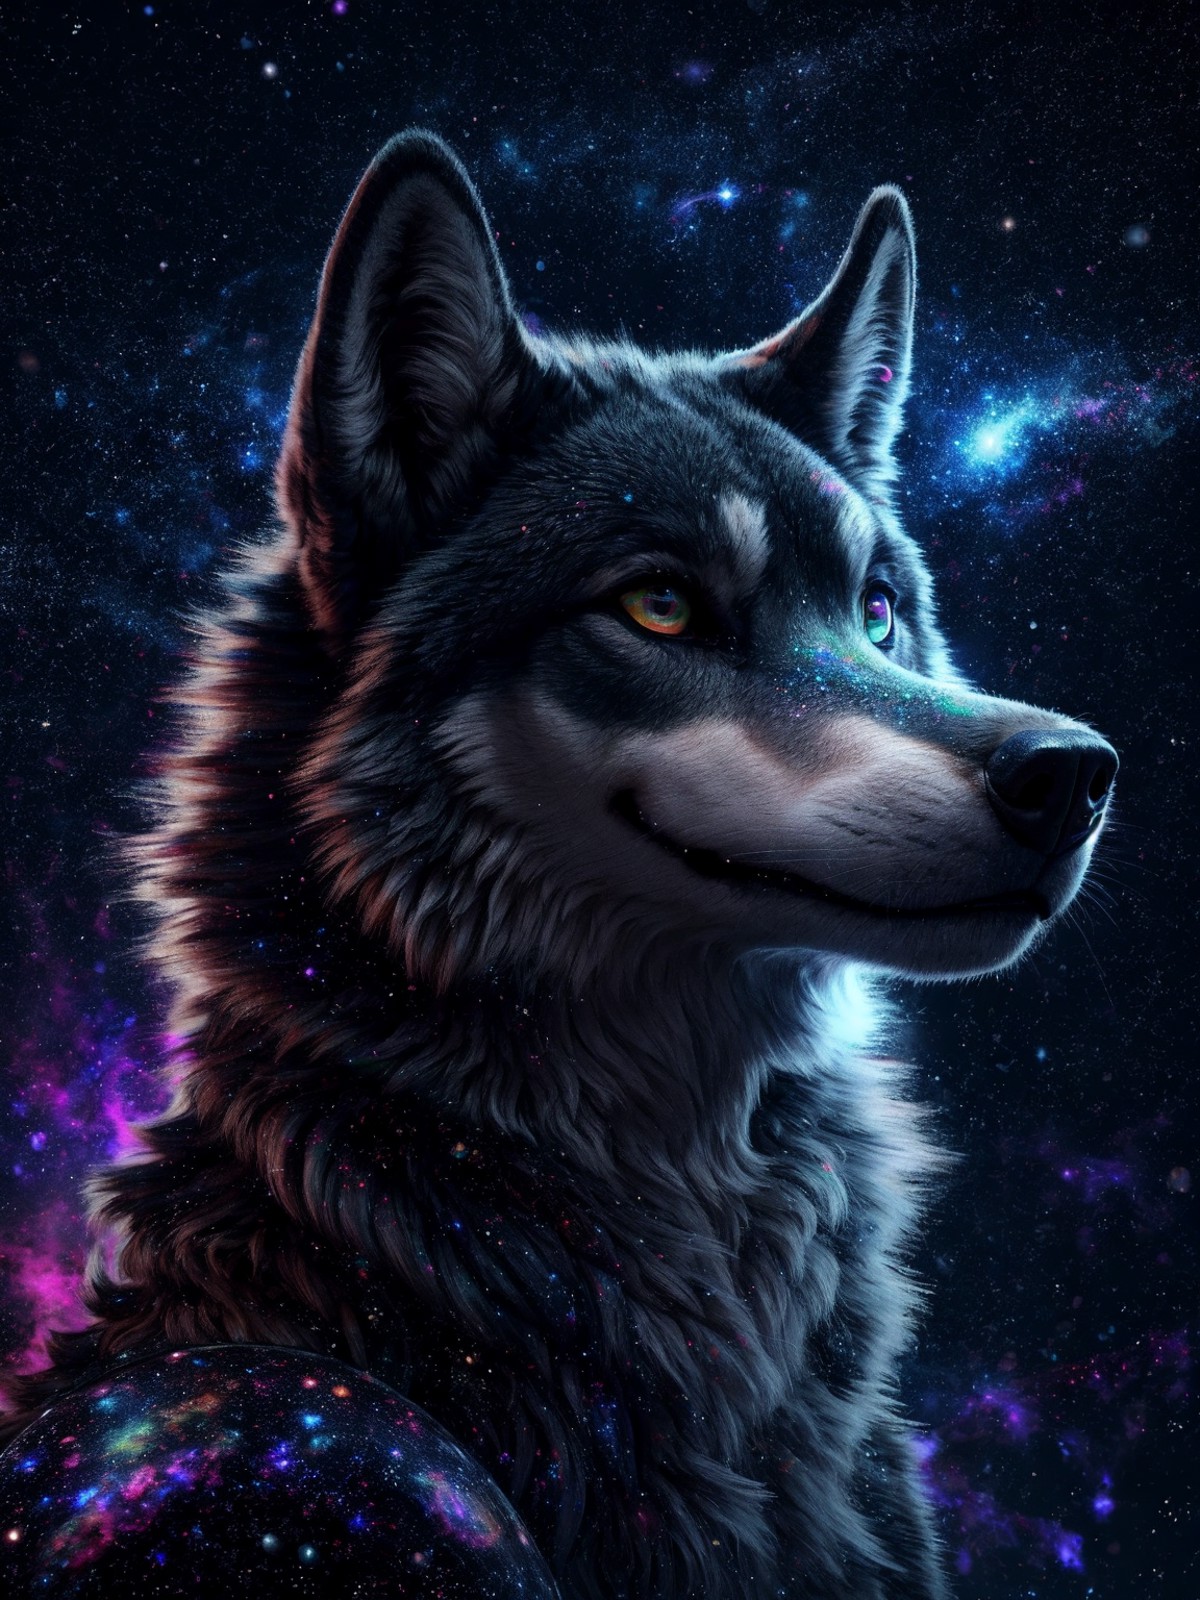 feral, wolf, energy, galaxies, spirals, space, nebulae, stars, smoke, iridescent, intricate detail, in the shape of a wolf...